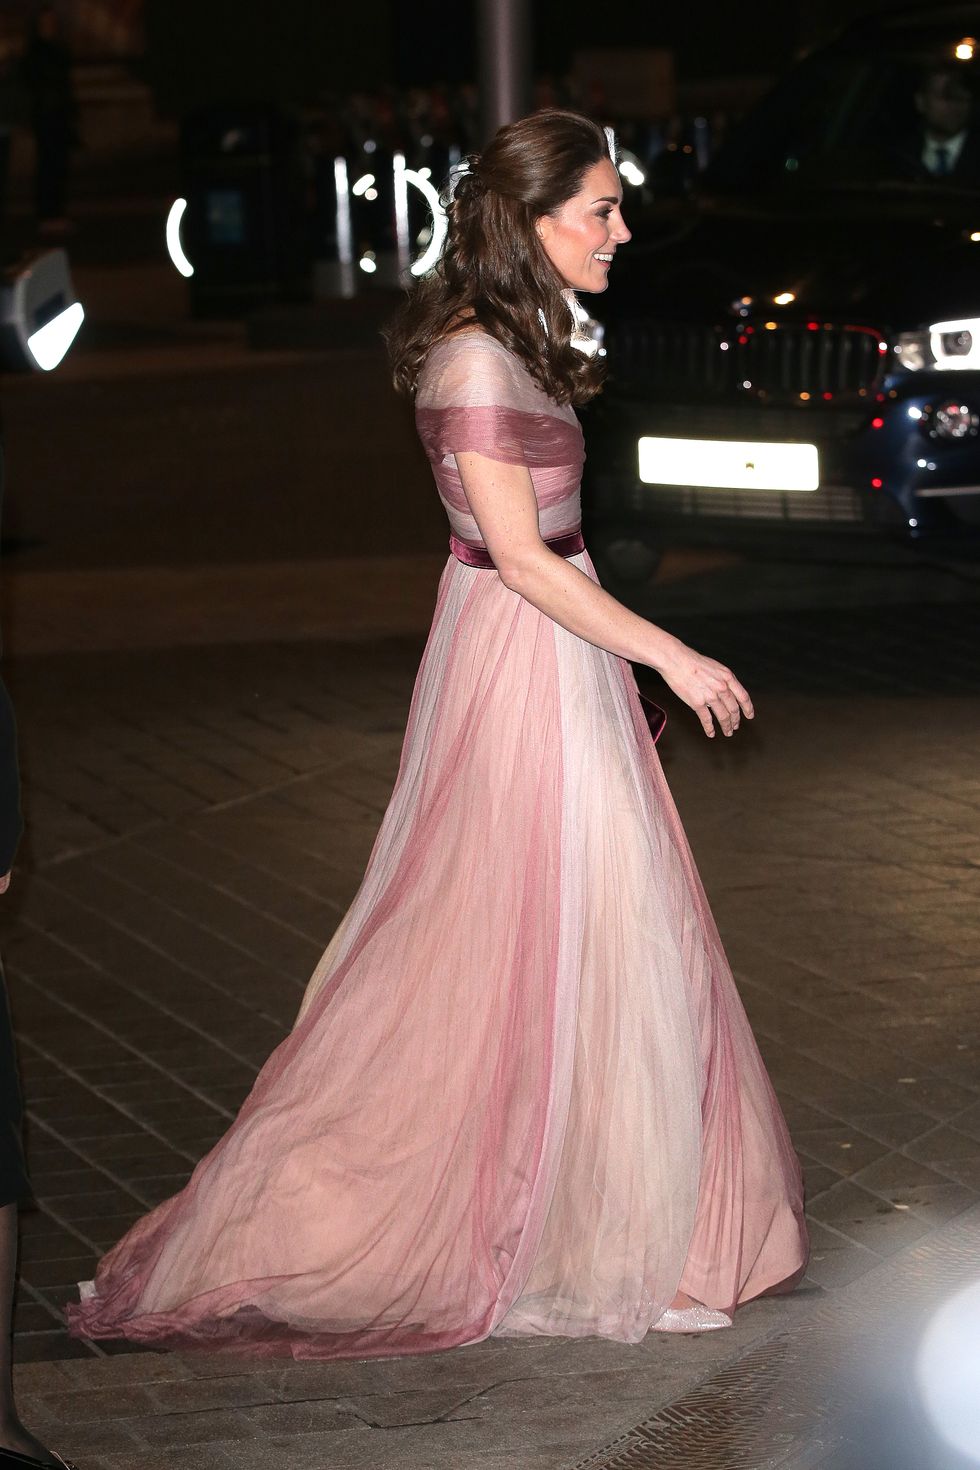 Kate Middleton Wears Pink and Cream Gucci Dress to the 100 Women